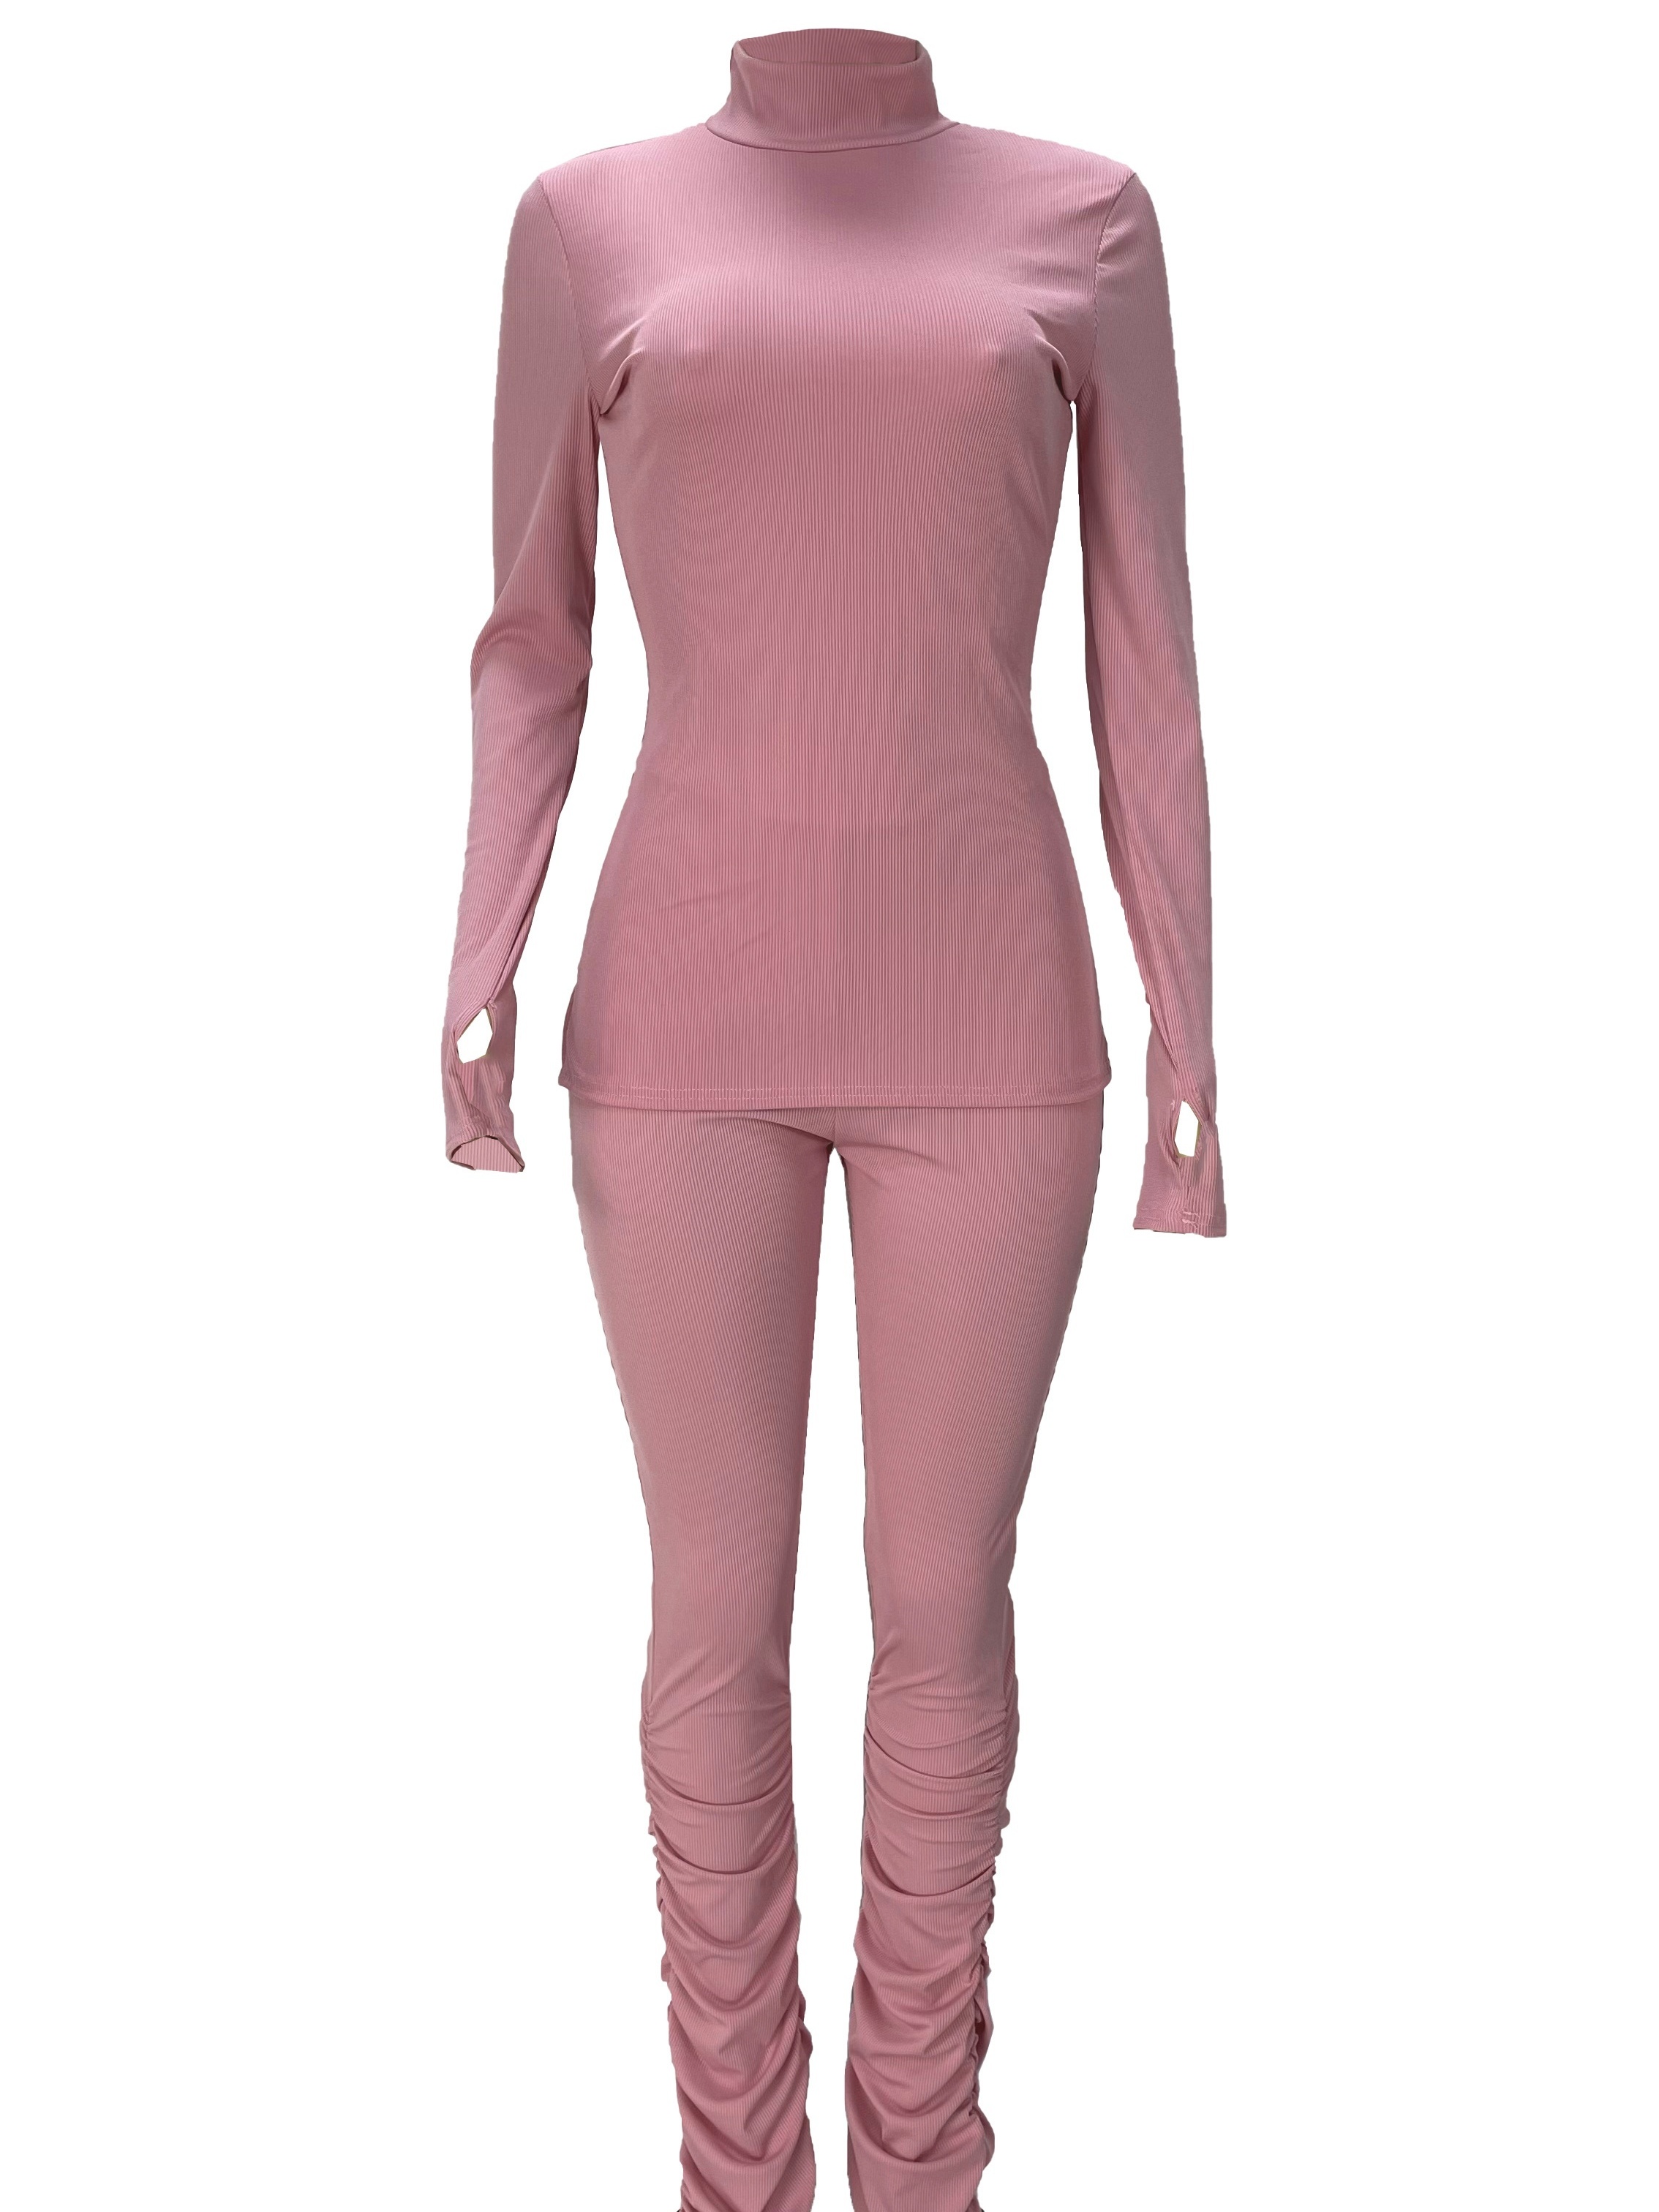 Women's Under-Layer Long Sleeve (Pink) Nice Ladies Polo